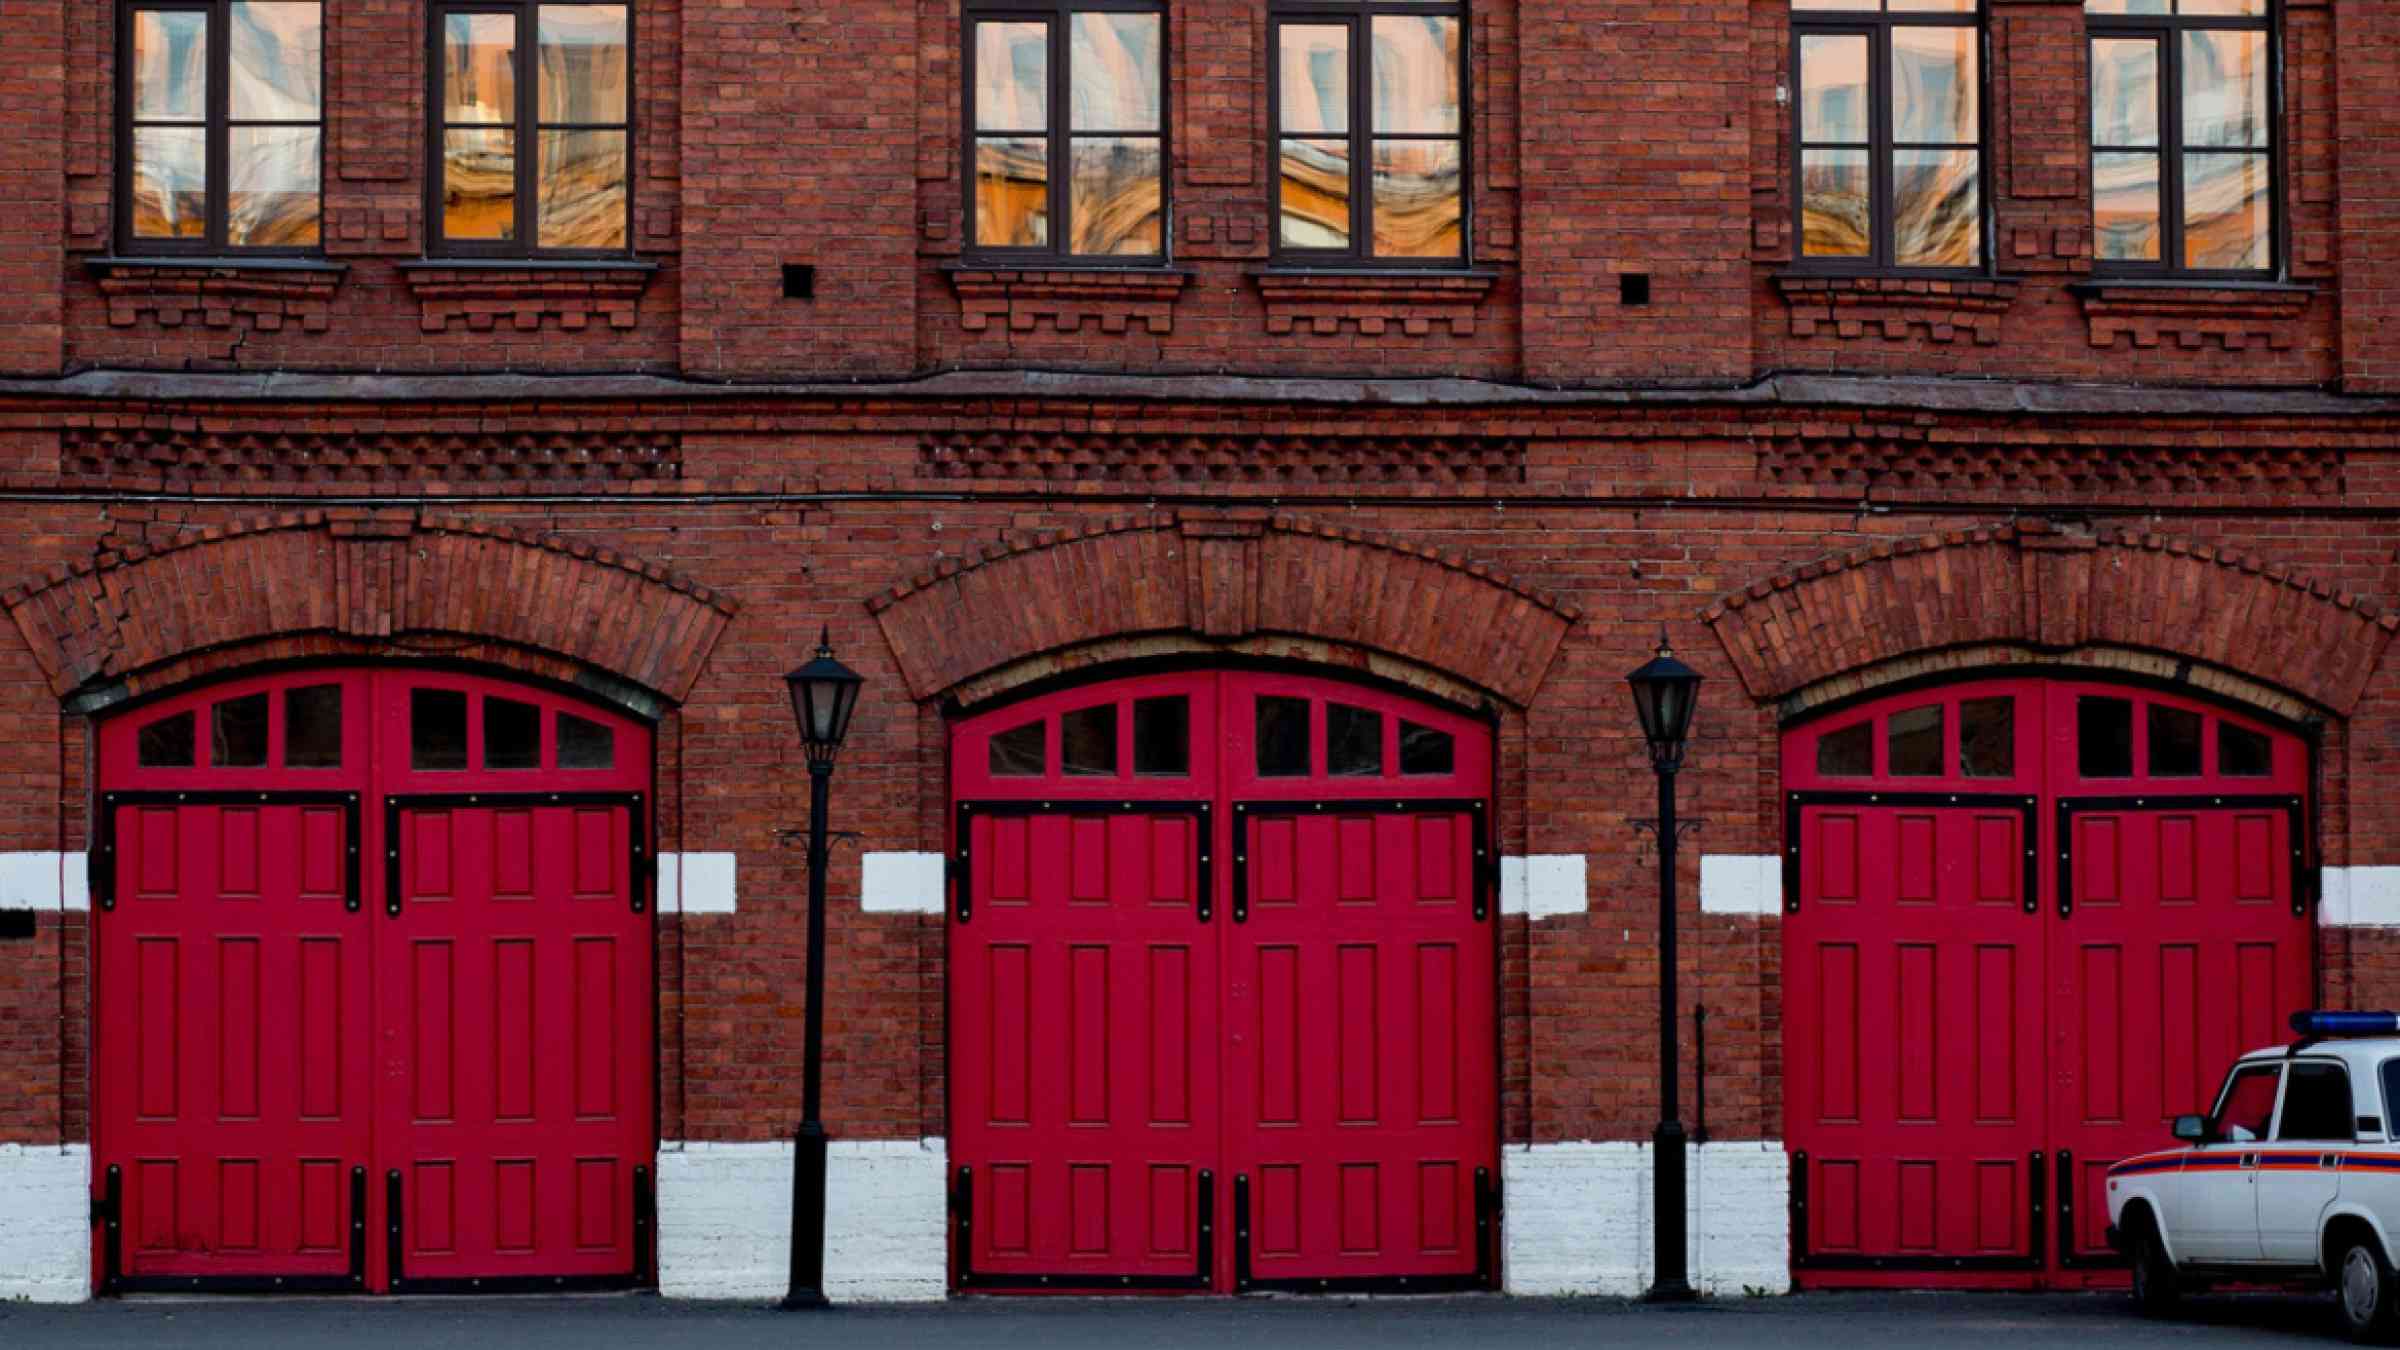 The facade of a fire station